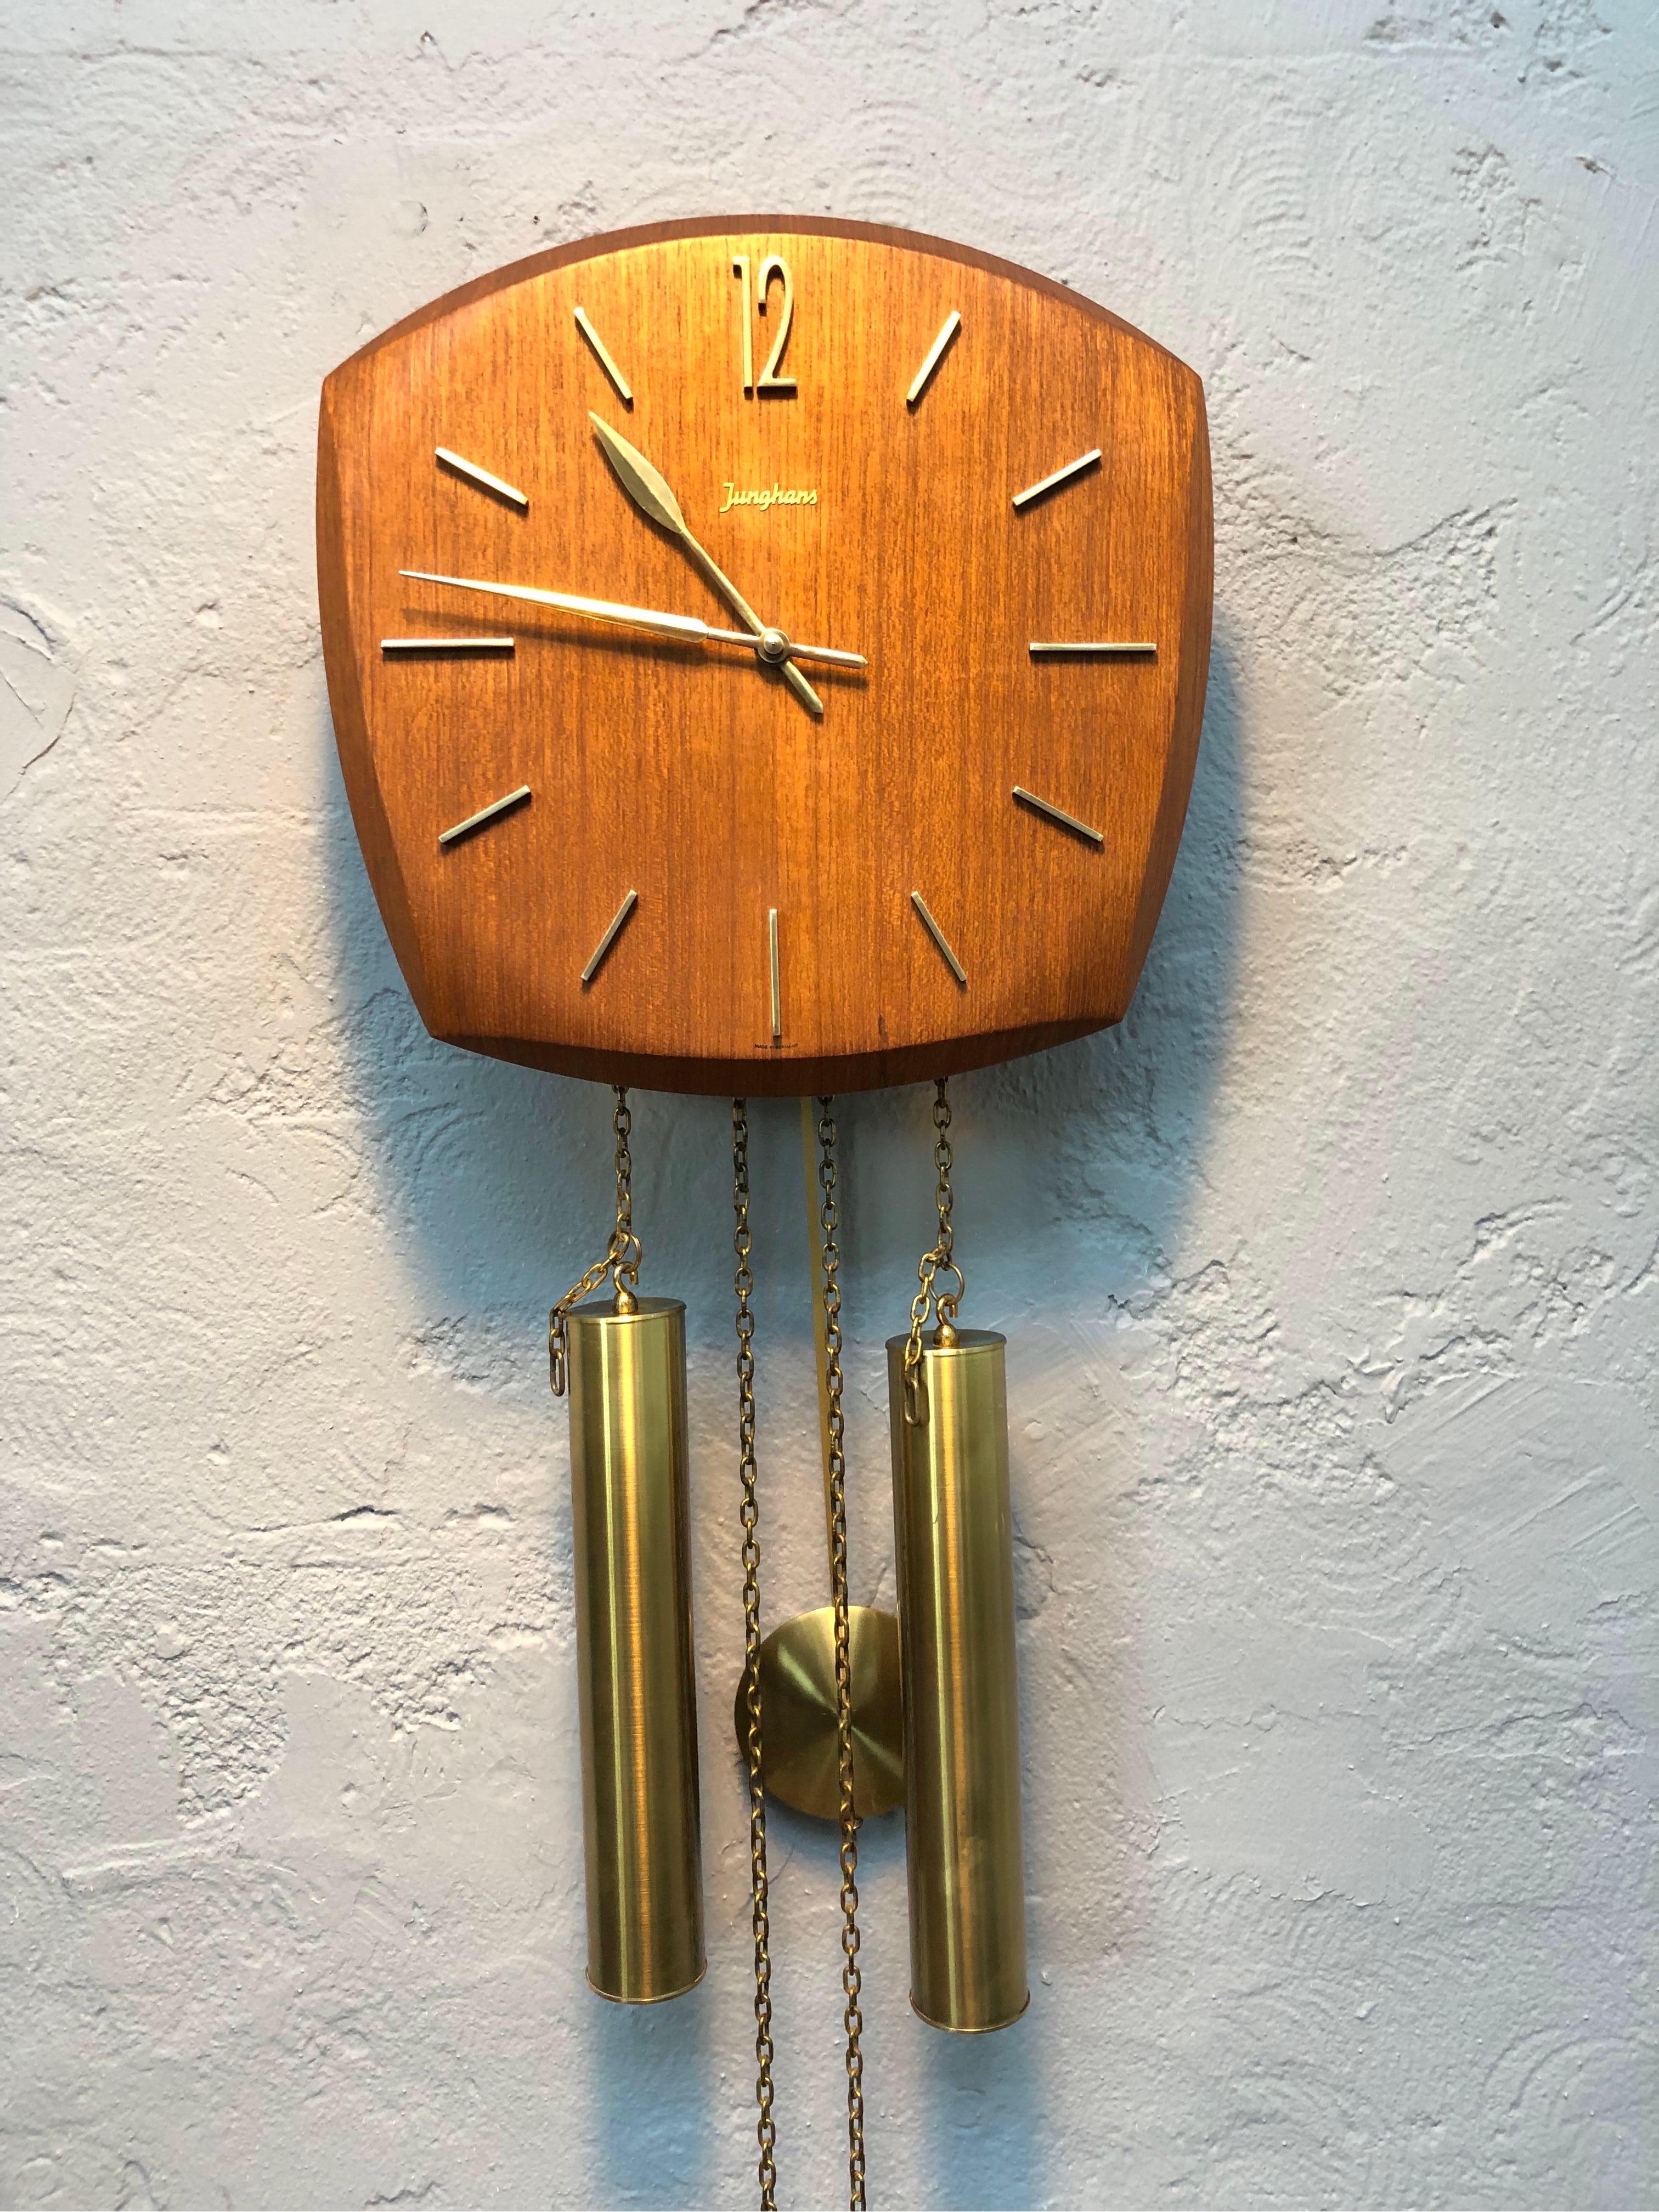 Vintage Junghans pendulum wall clock from the 1960s in teak veneer with brass fittings.
In lovely working condition and with chimes on the half and whole hour that can be switched off if so desired.
Please see the video.
A very clean pendulum